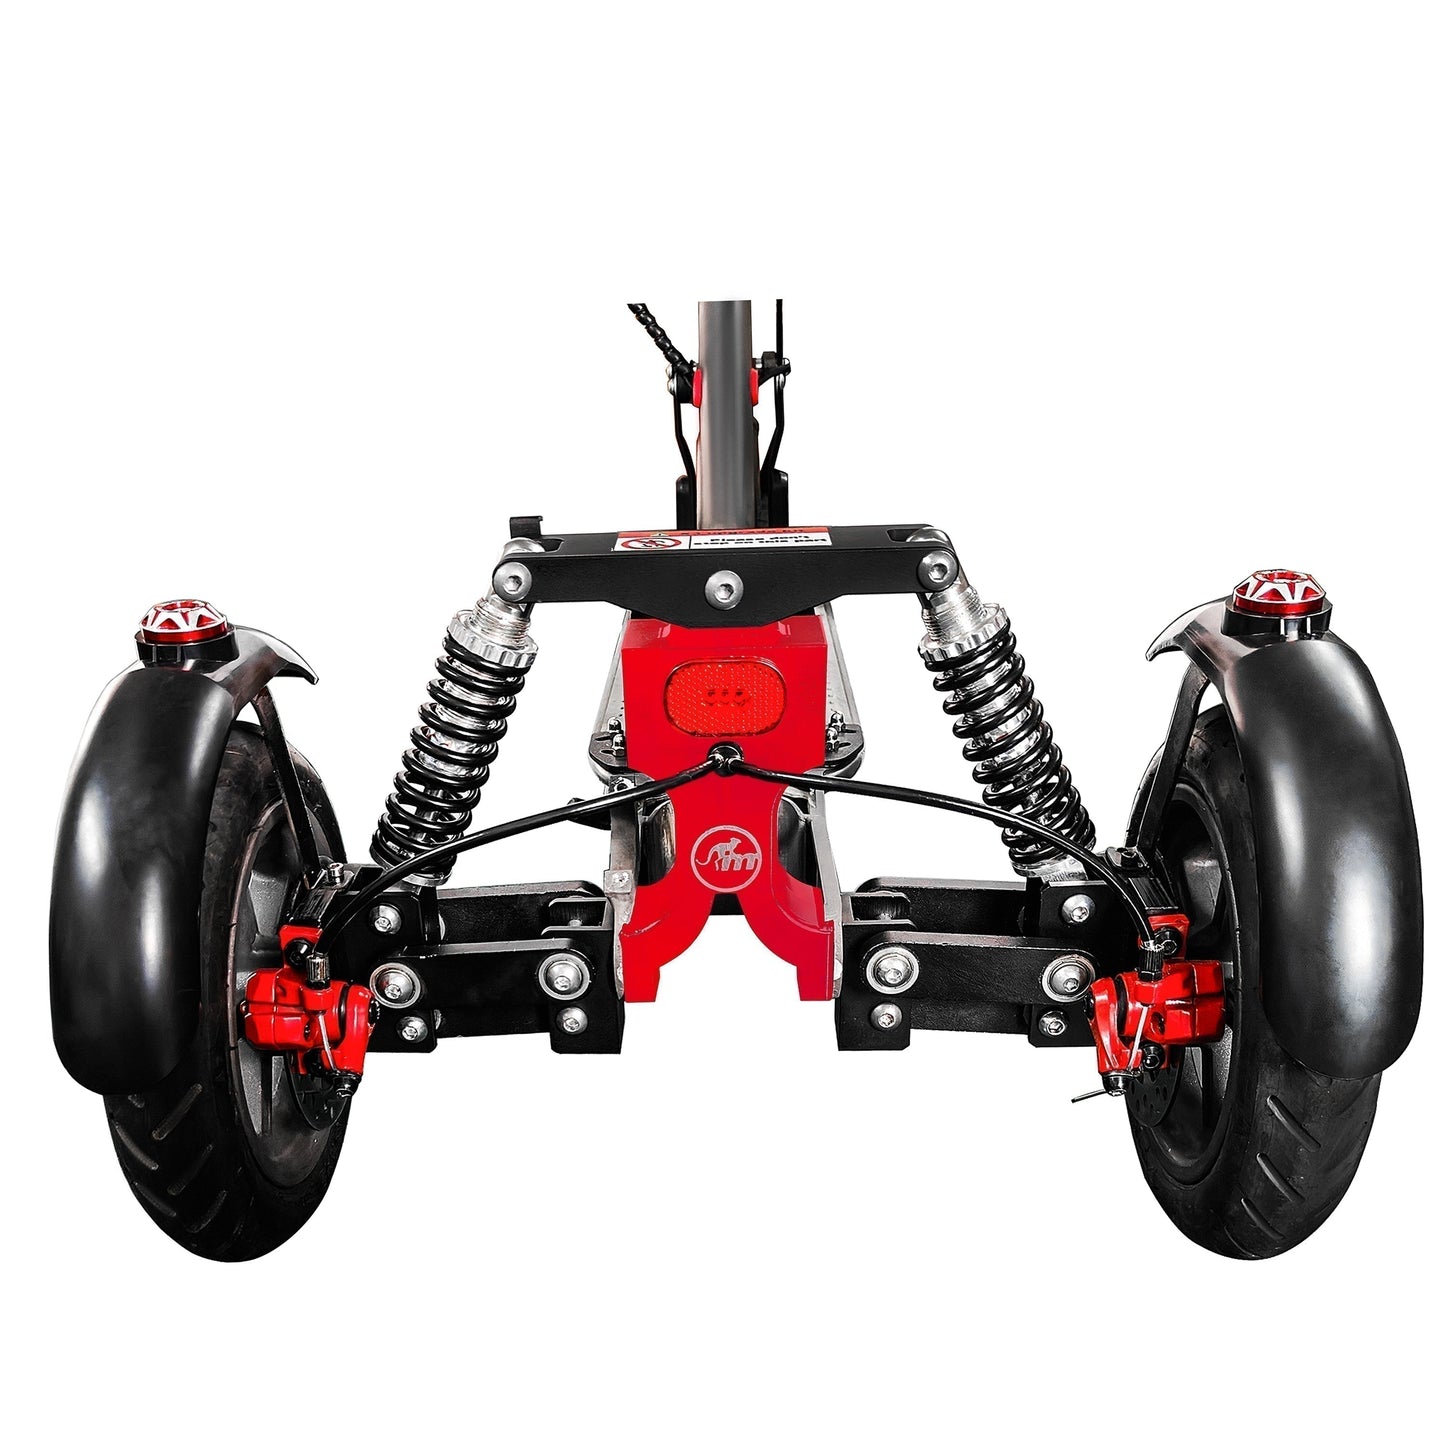 Monorim X3 upgrade kit to be Three wheels special for s9pro frames